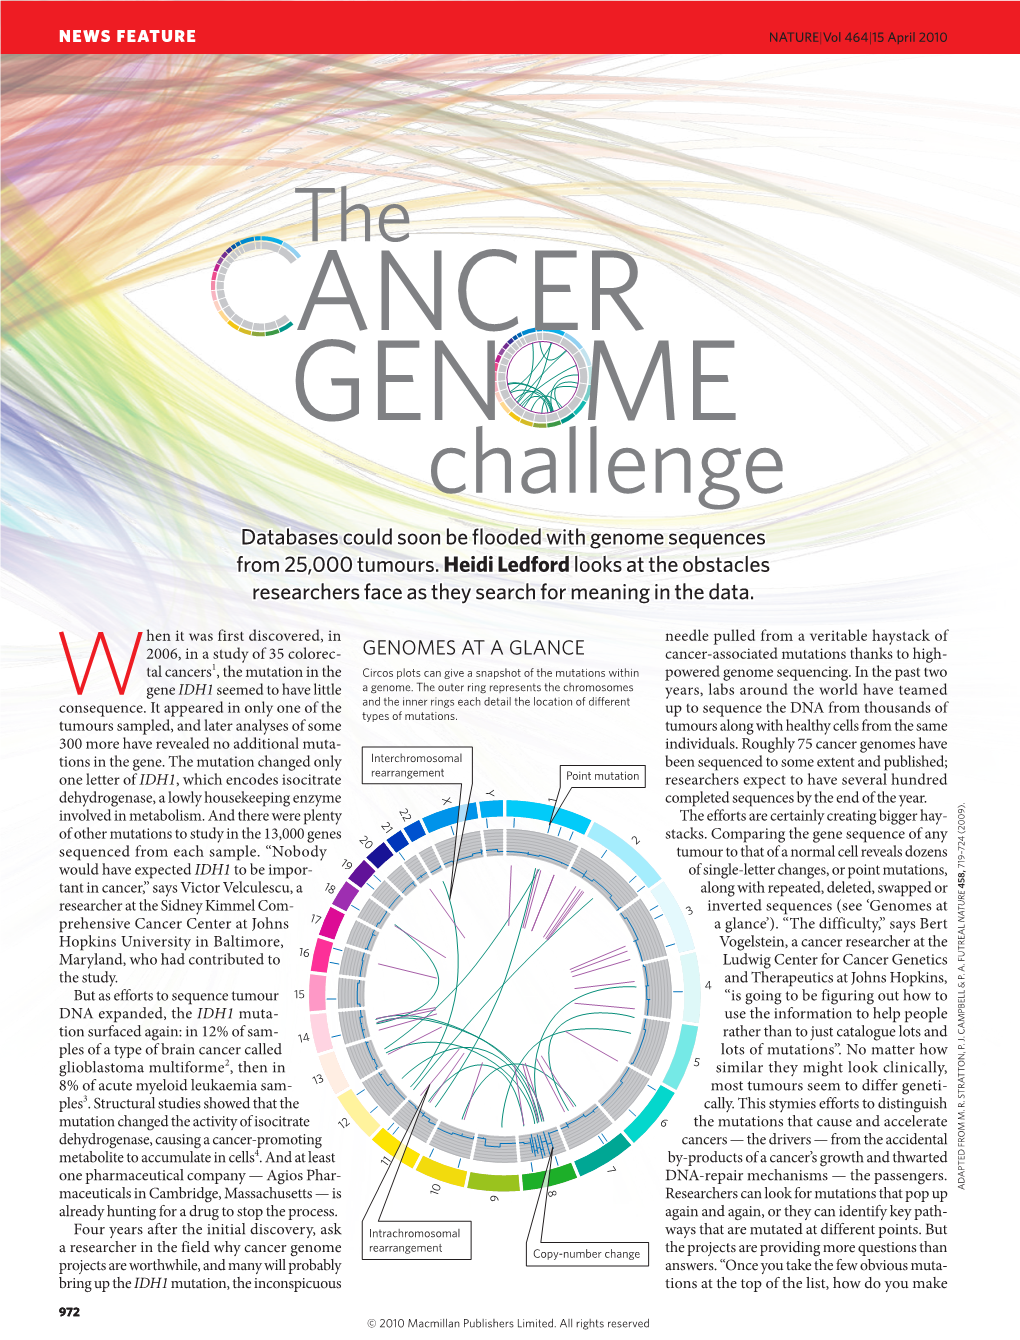 The Cancer Genome Challenge